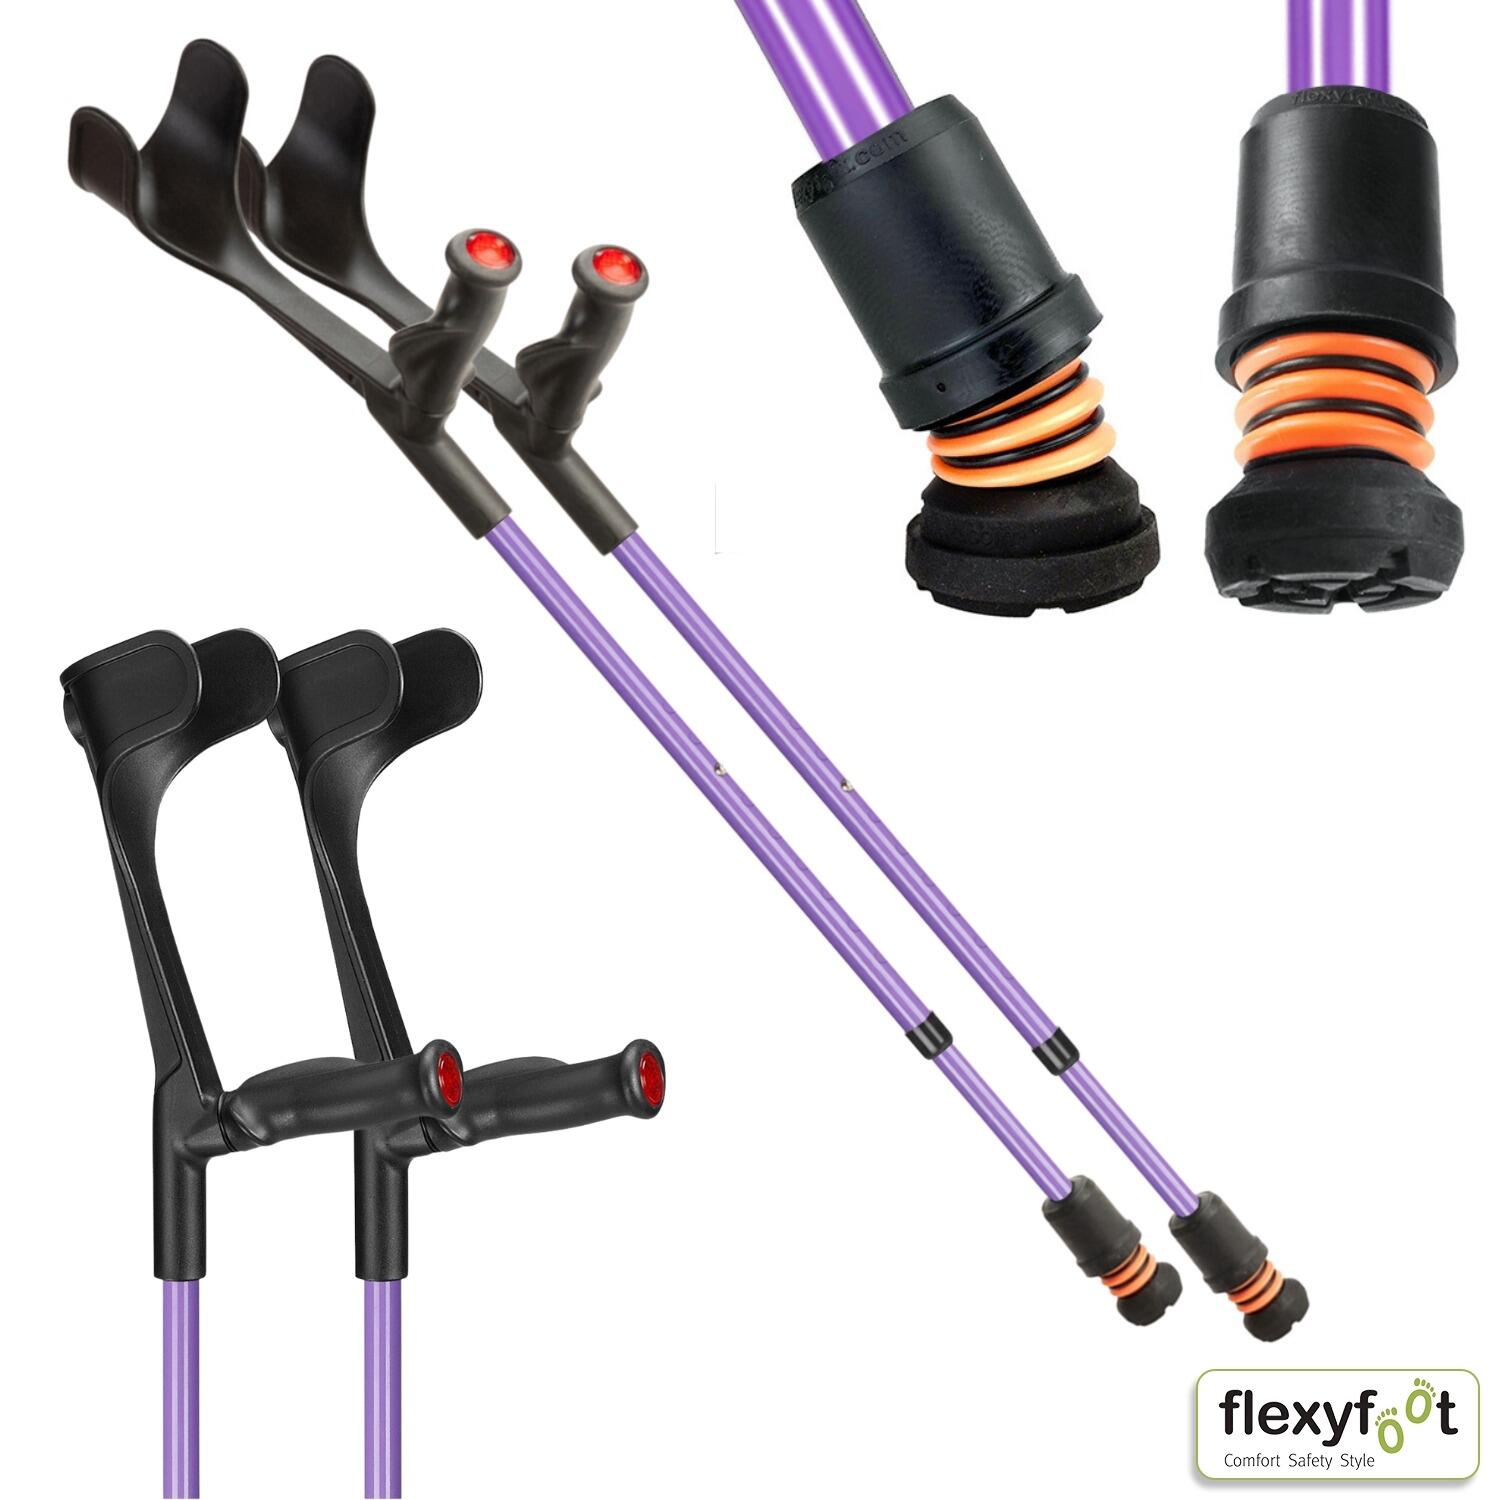 A pair of lilac Flexyfoot Comfort Grip Open Cuff Crutches